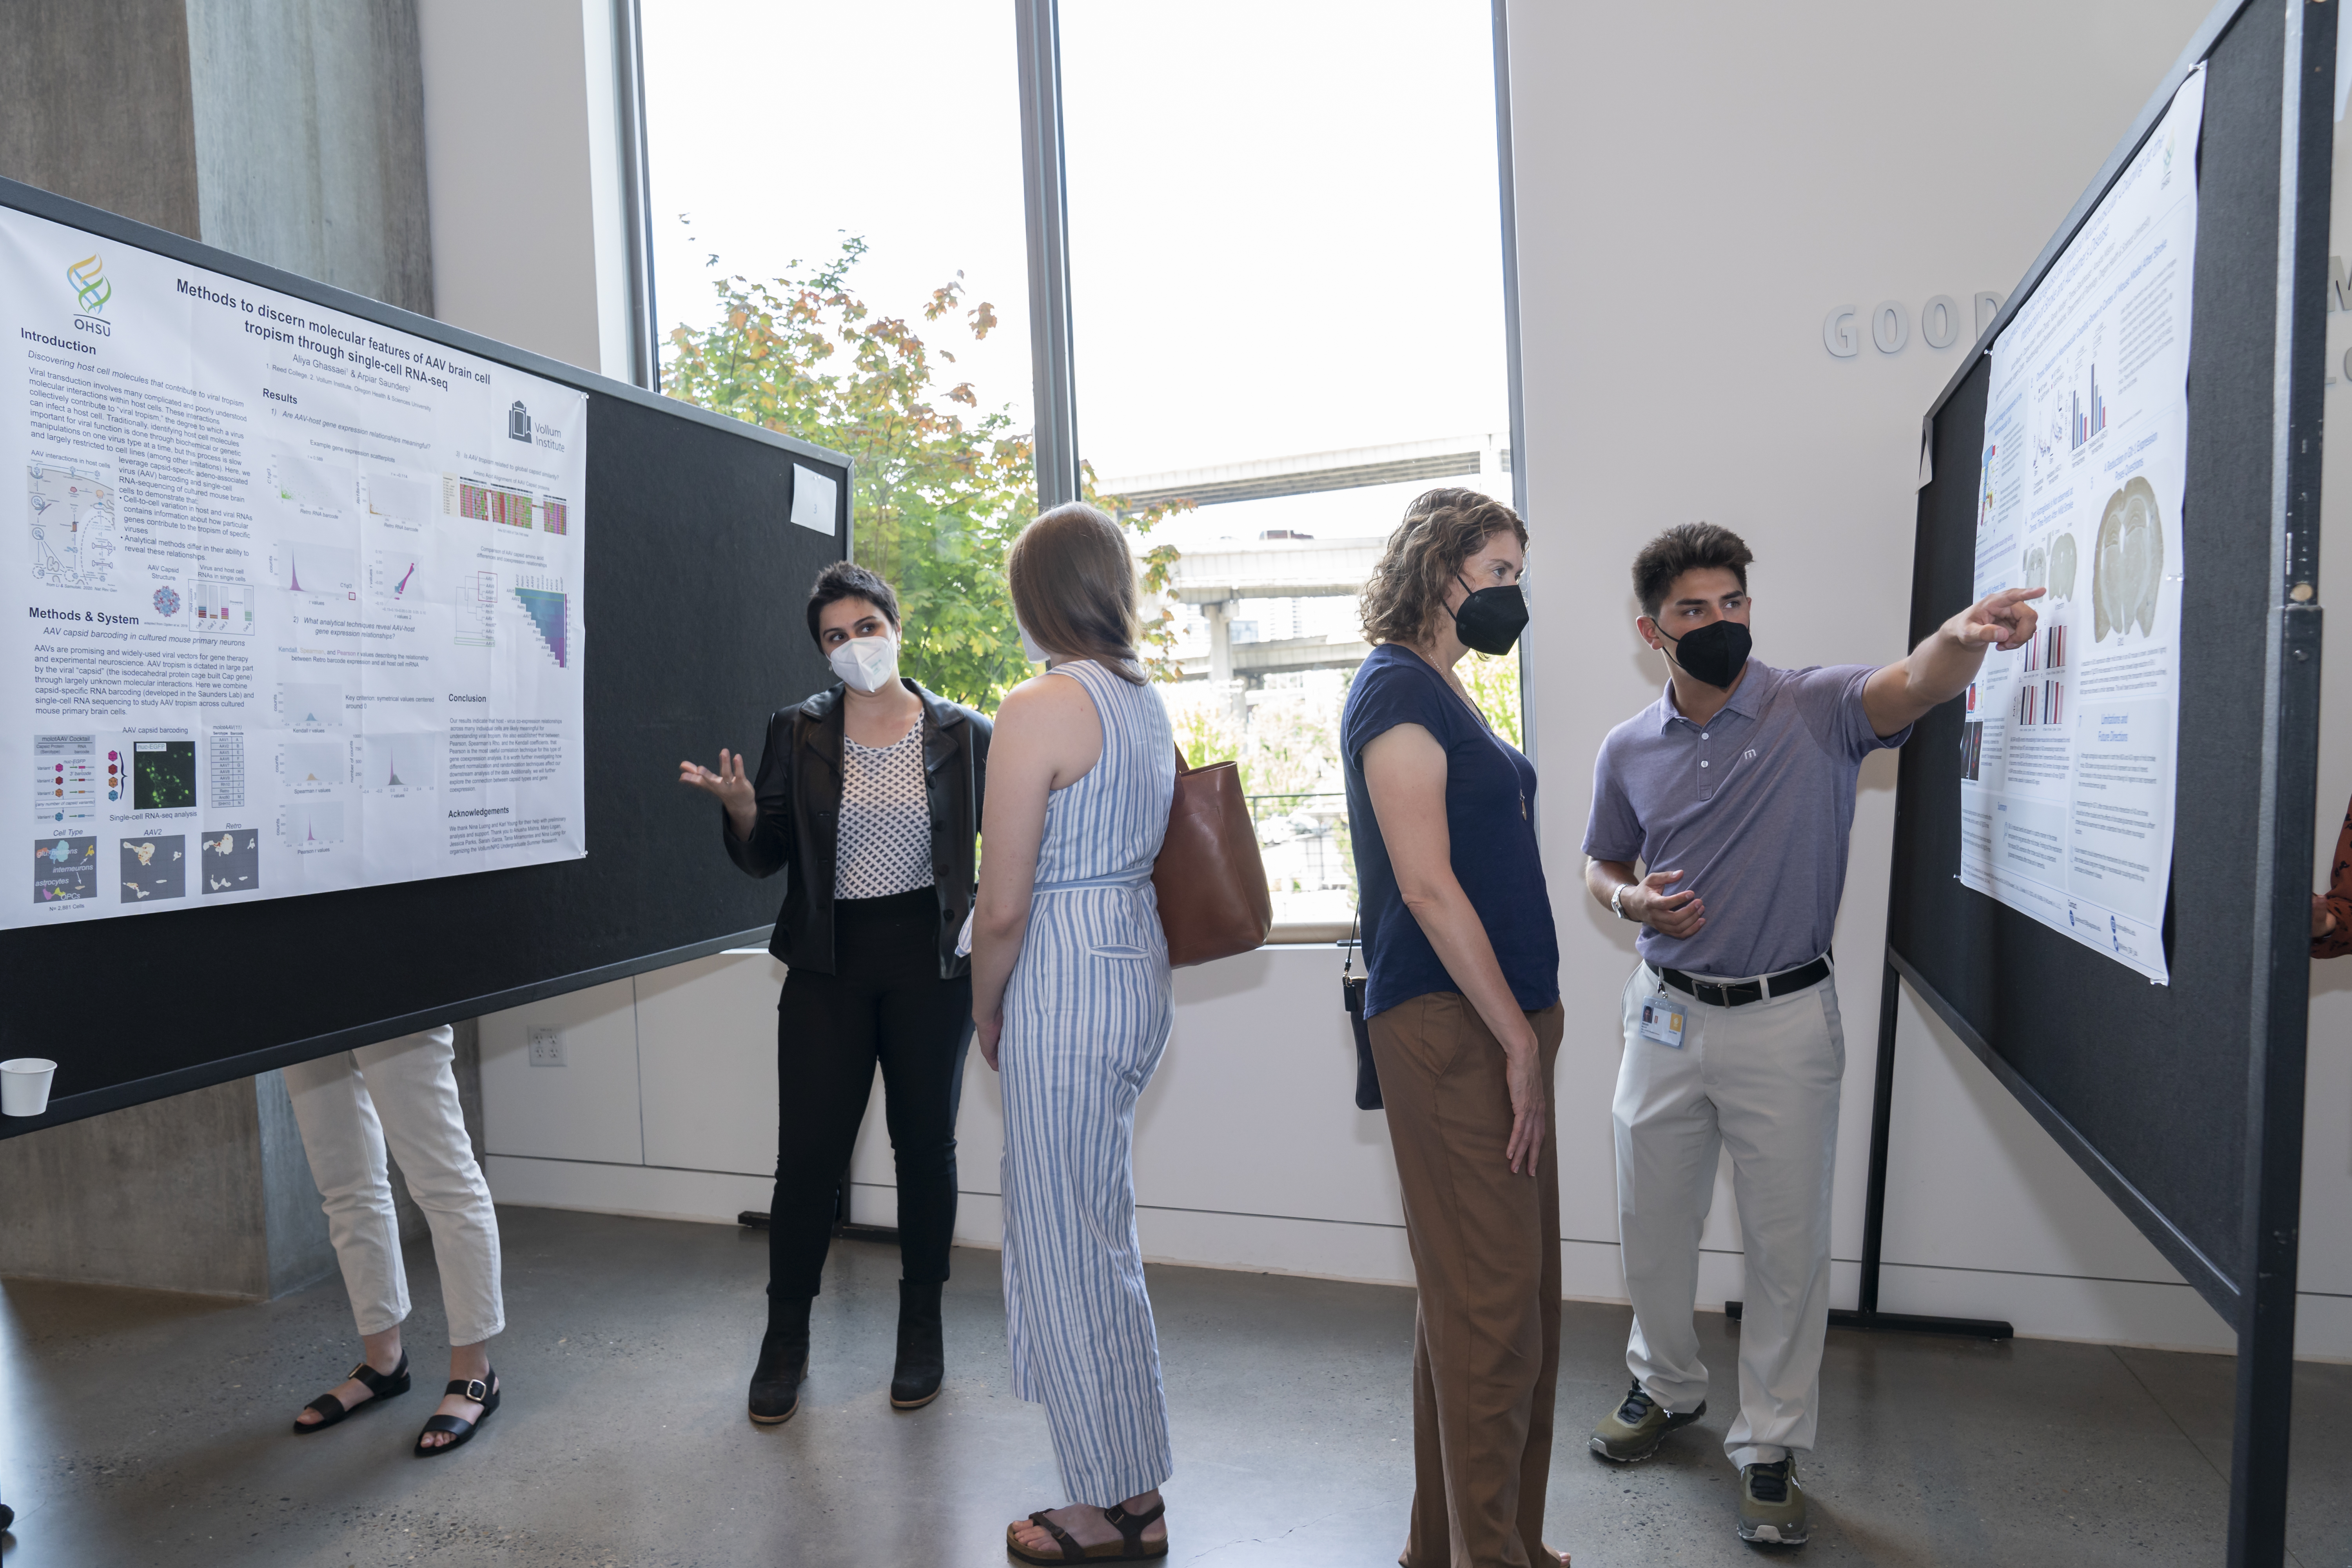 Summer interns, Aliya and Jacob, present their summer research during the poster symposium.